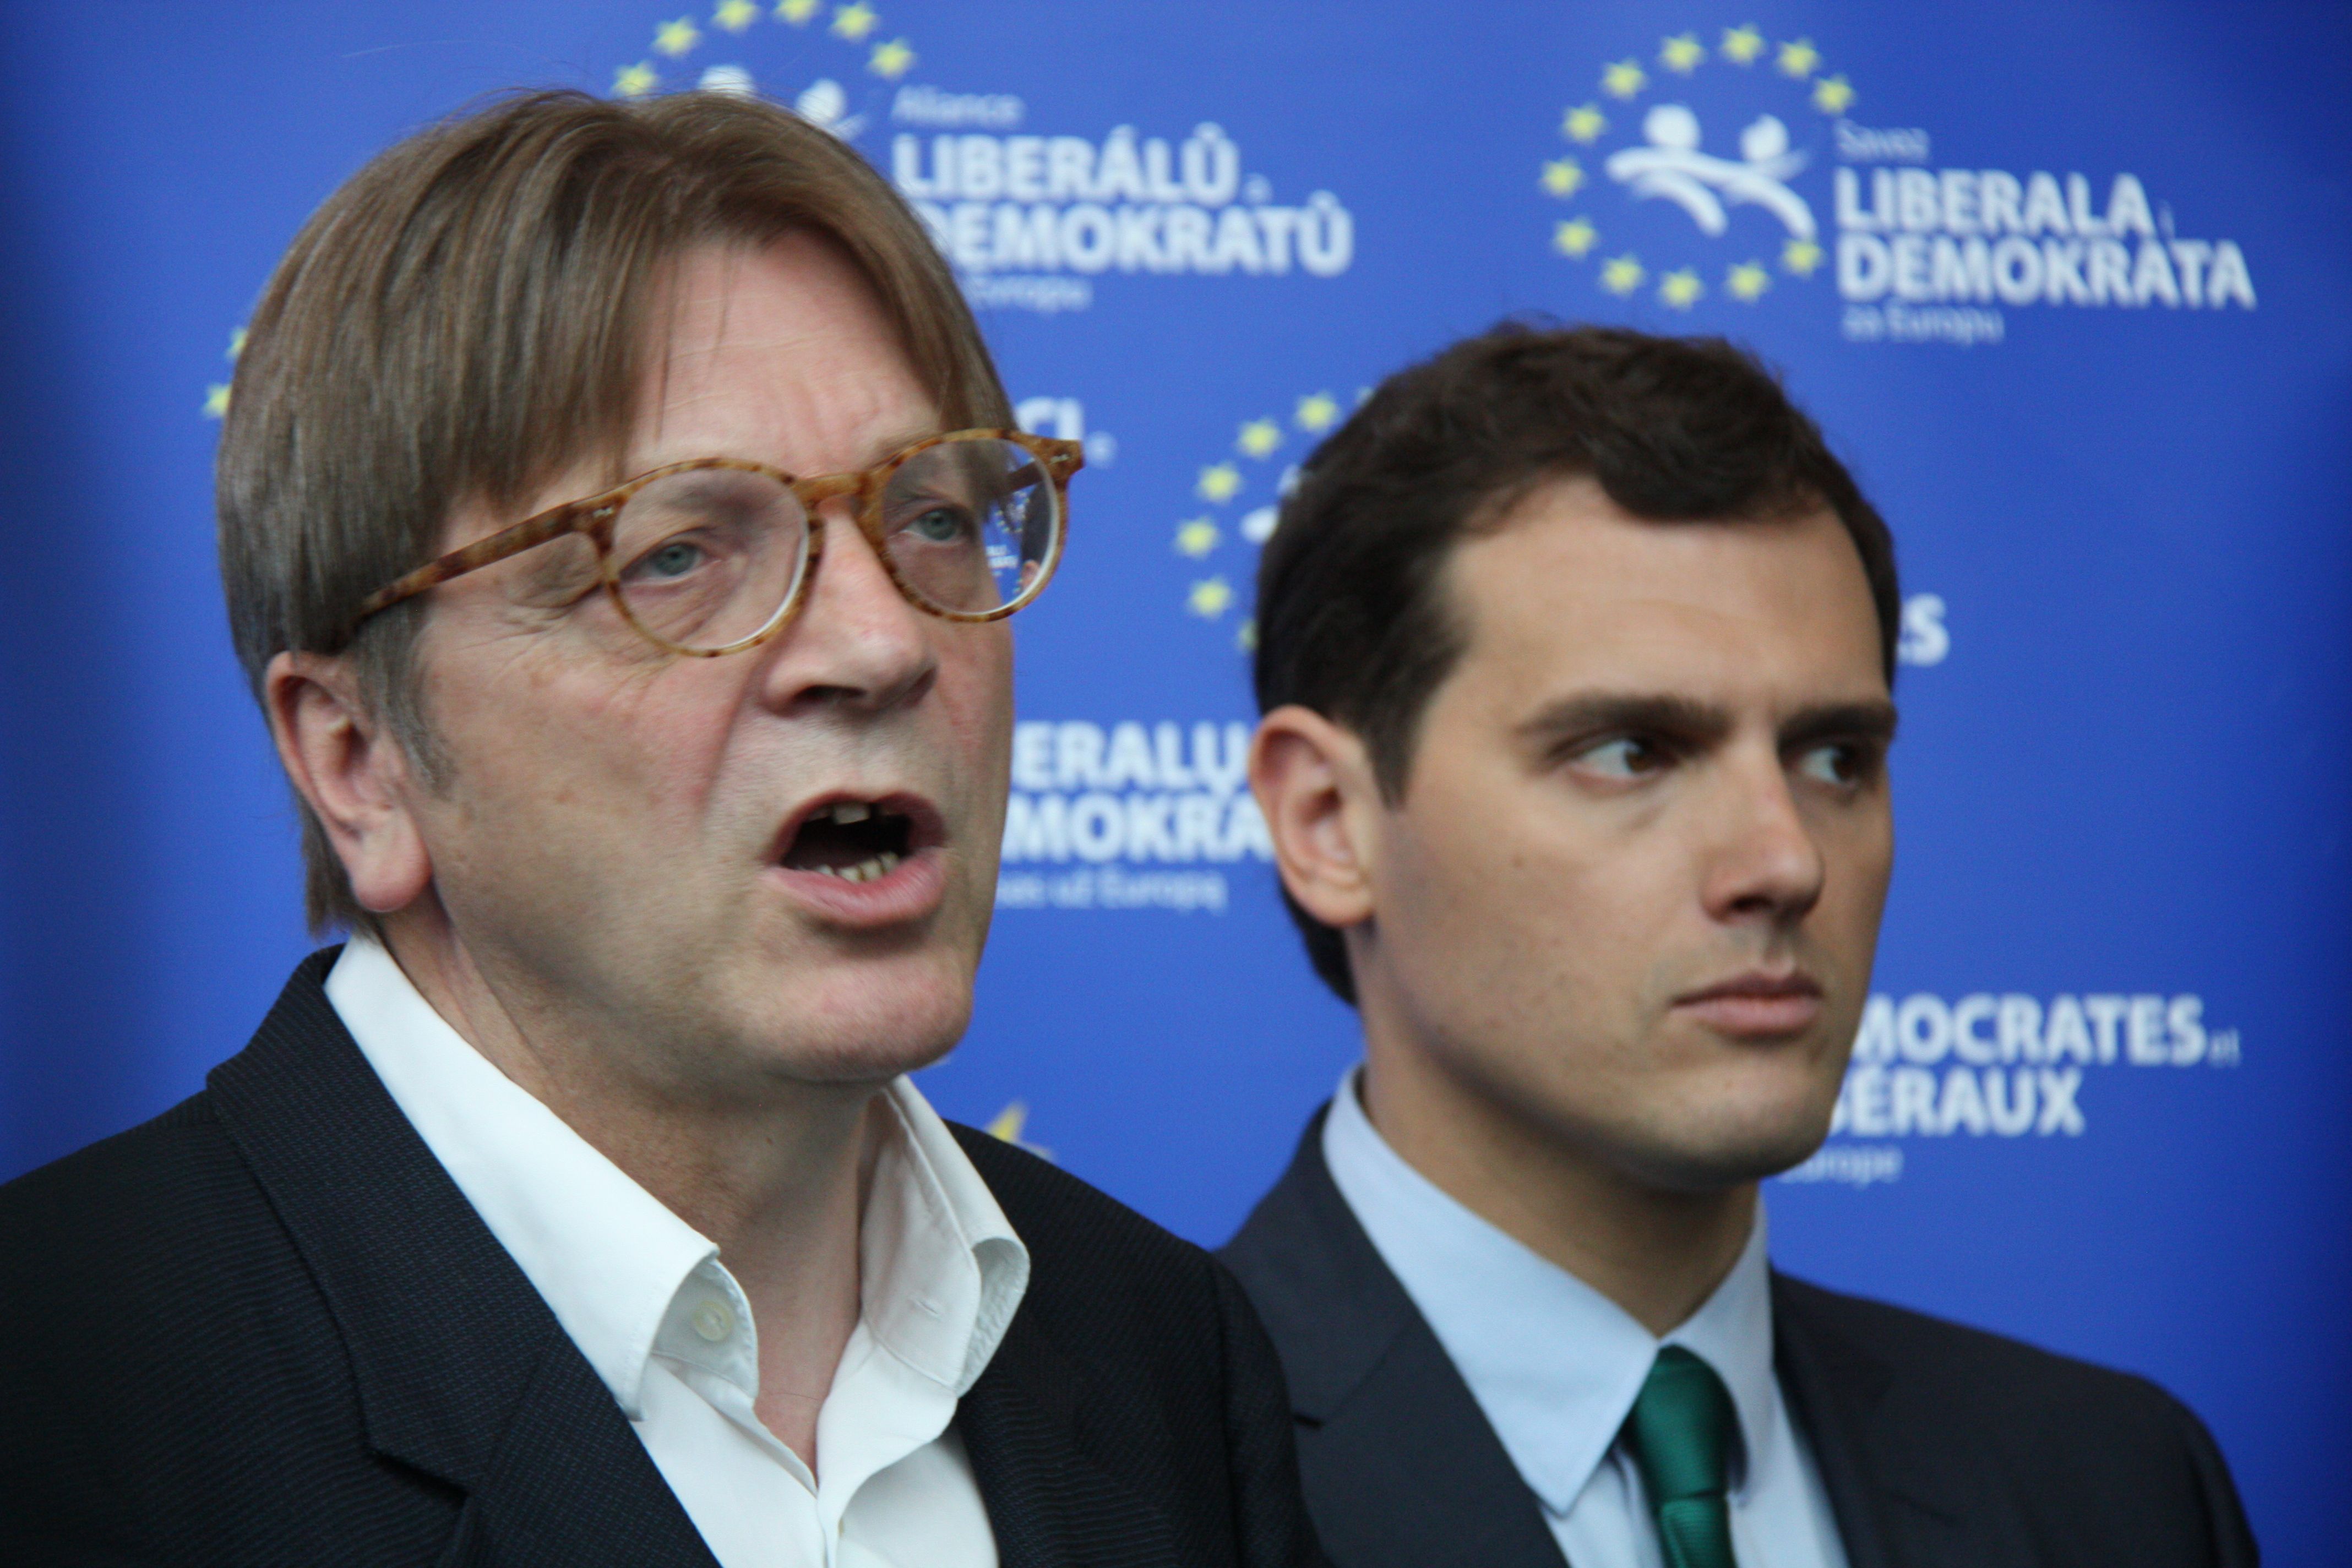 Euro liberal Verhofstadt accused of hypocrisy: "Why condemn Poland and not Spain?"